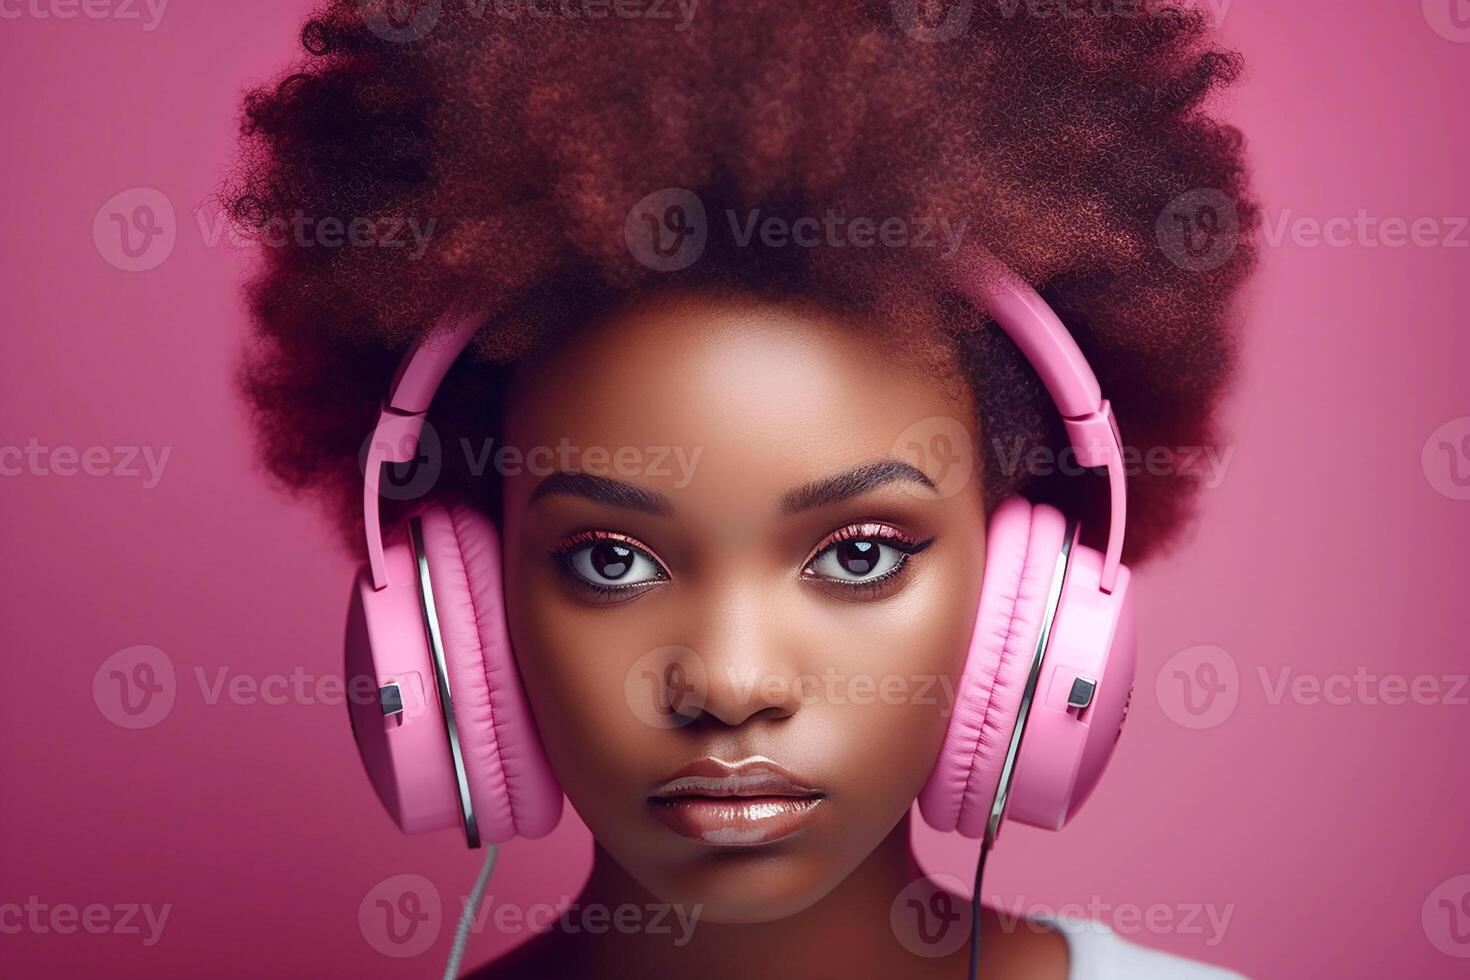 Dark-skinned African girl with black curly hair, wearing pink headphones on a pink background. Studio portrait. photo